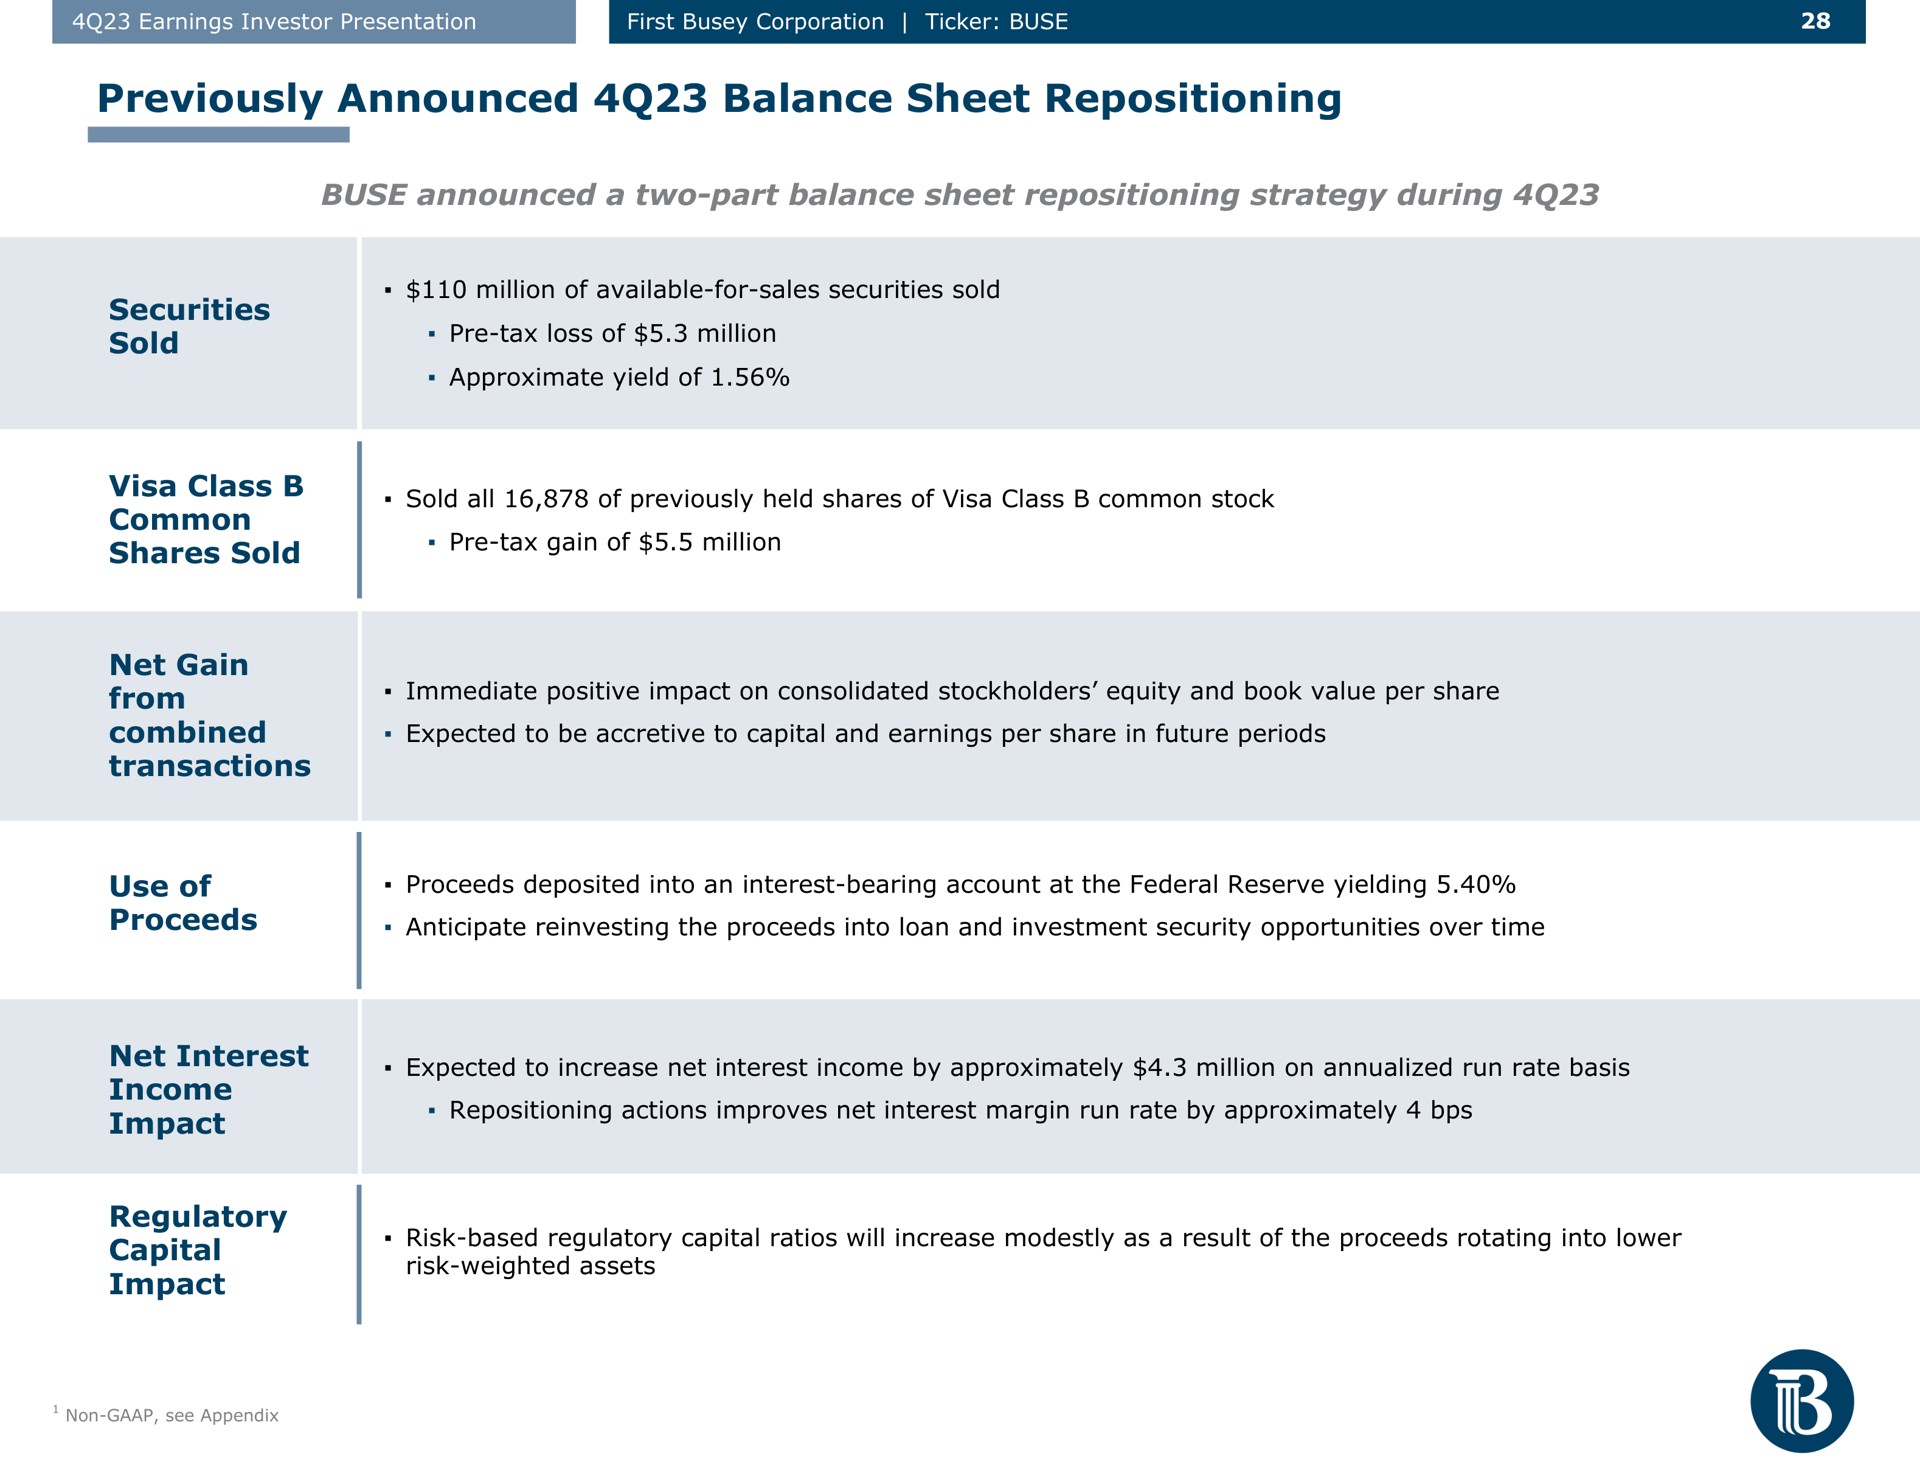 previously announced balance sheet repositioning announced a two part balance sheet repositioning strategy during securities sold visa class common shares sold net gain from combined transactions use of proceeds net interest income impact regulatory capital impact million available for sales tax loss million actions improves margin run rate by approximately risk based ratios will increase modestly as result the rotating into lower | First Busey